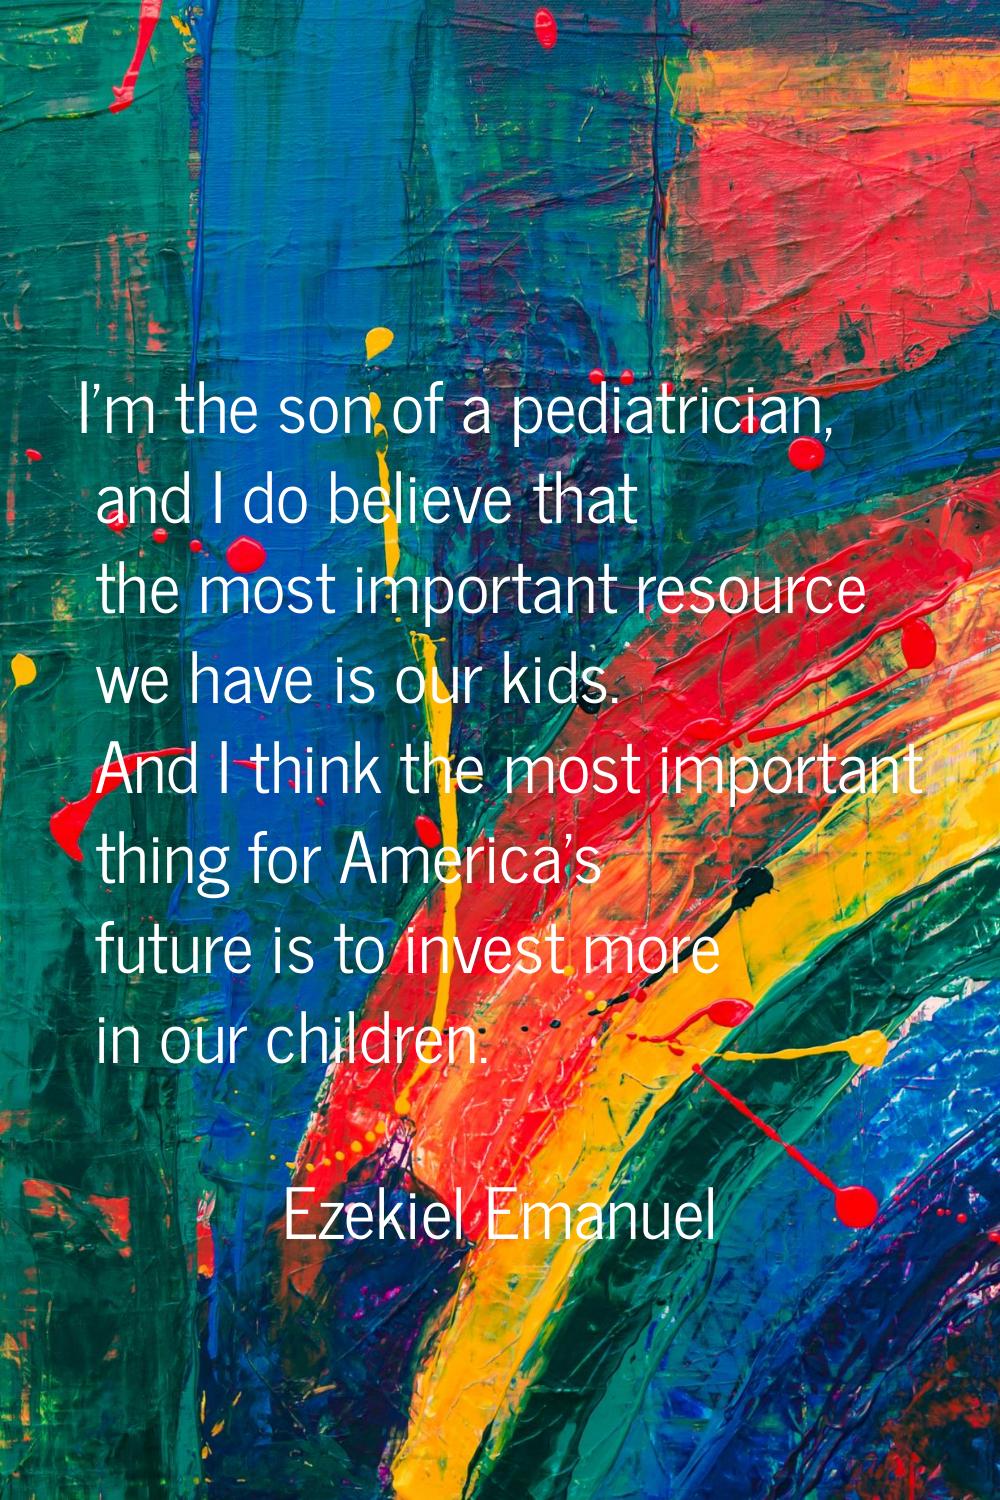 I'm the son of a pediatrician, and I do believe that the most important resource we have is our kid